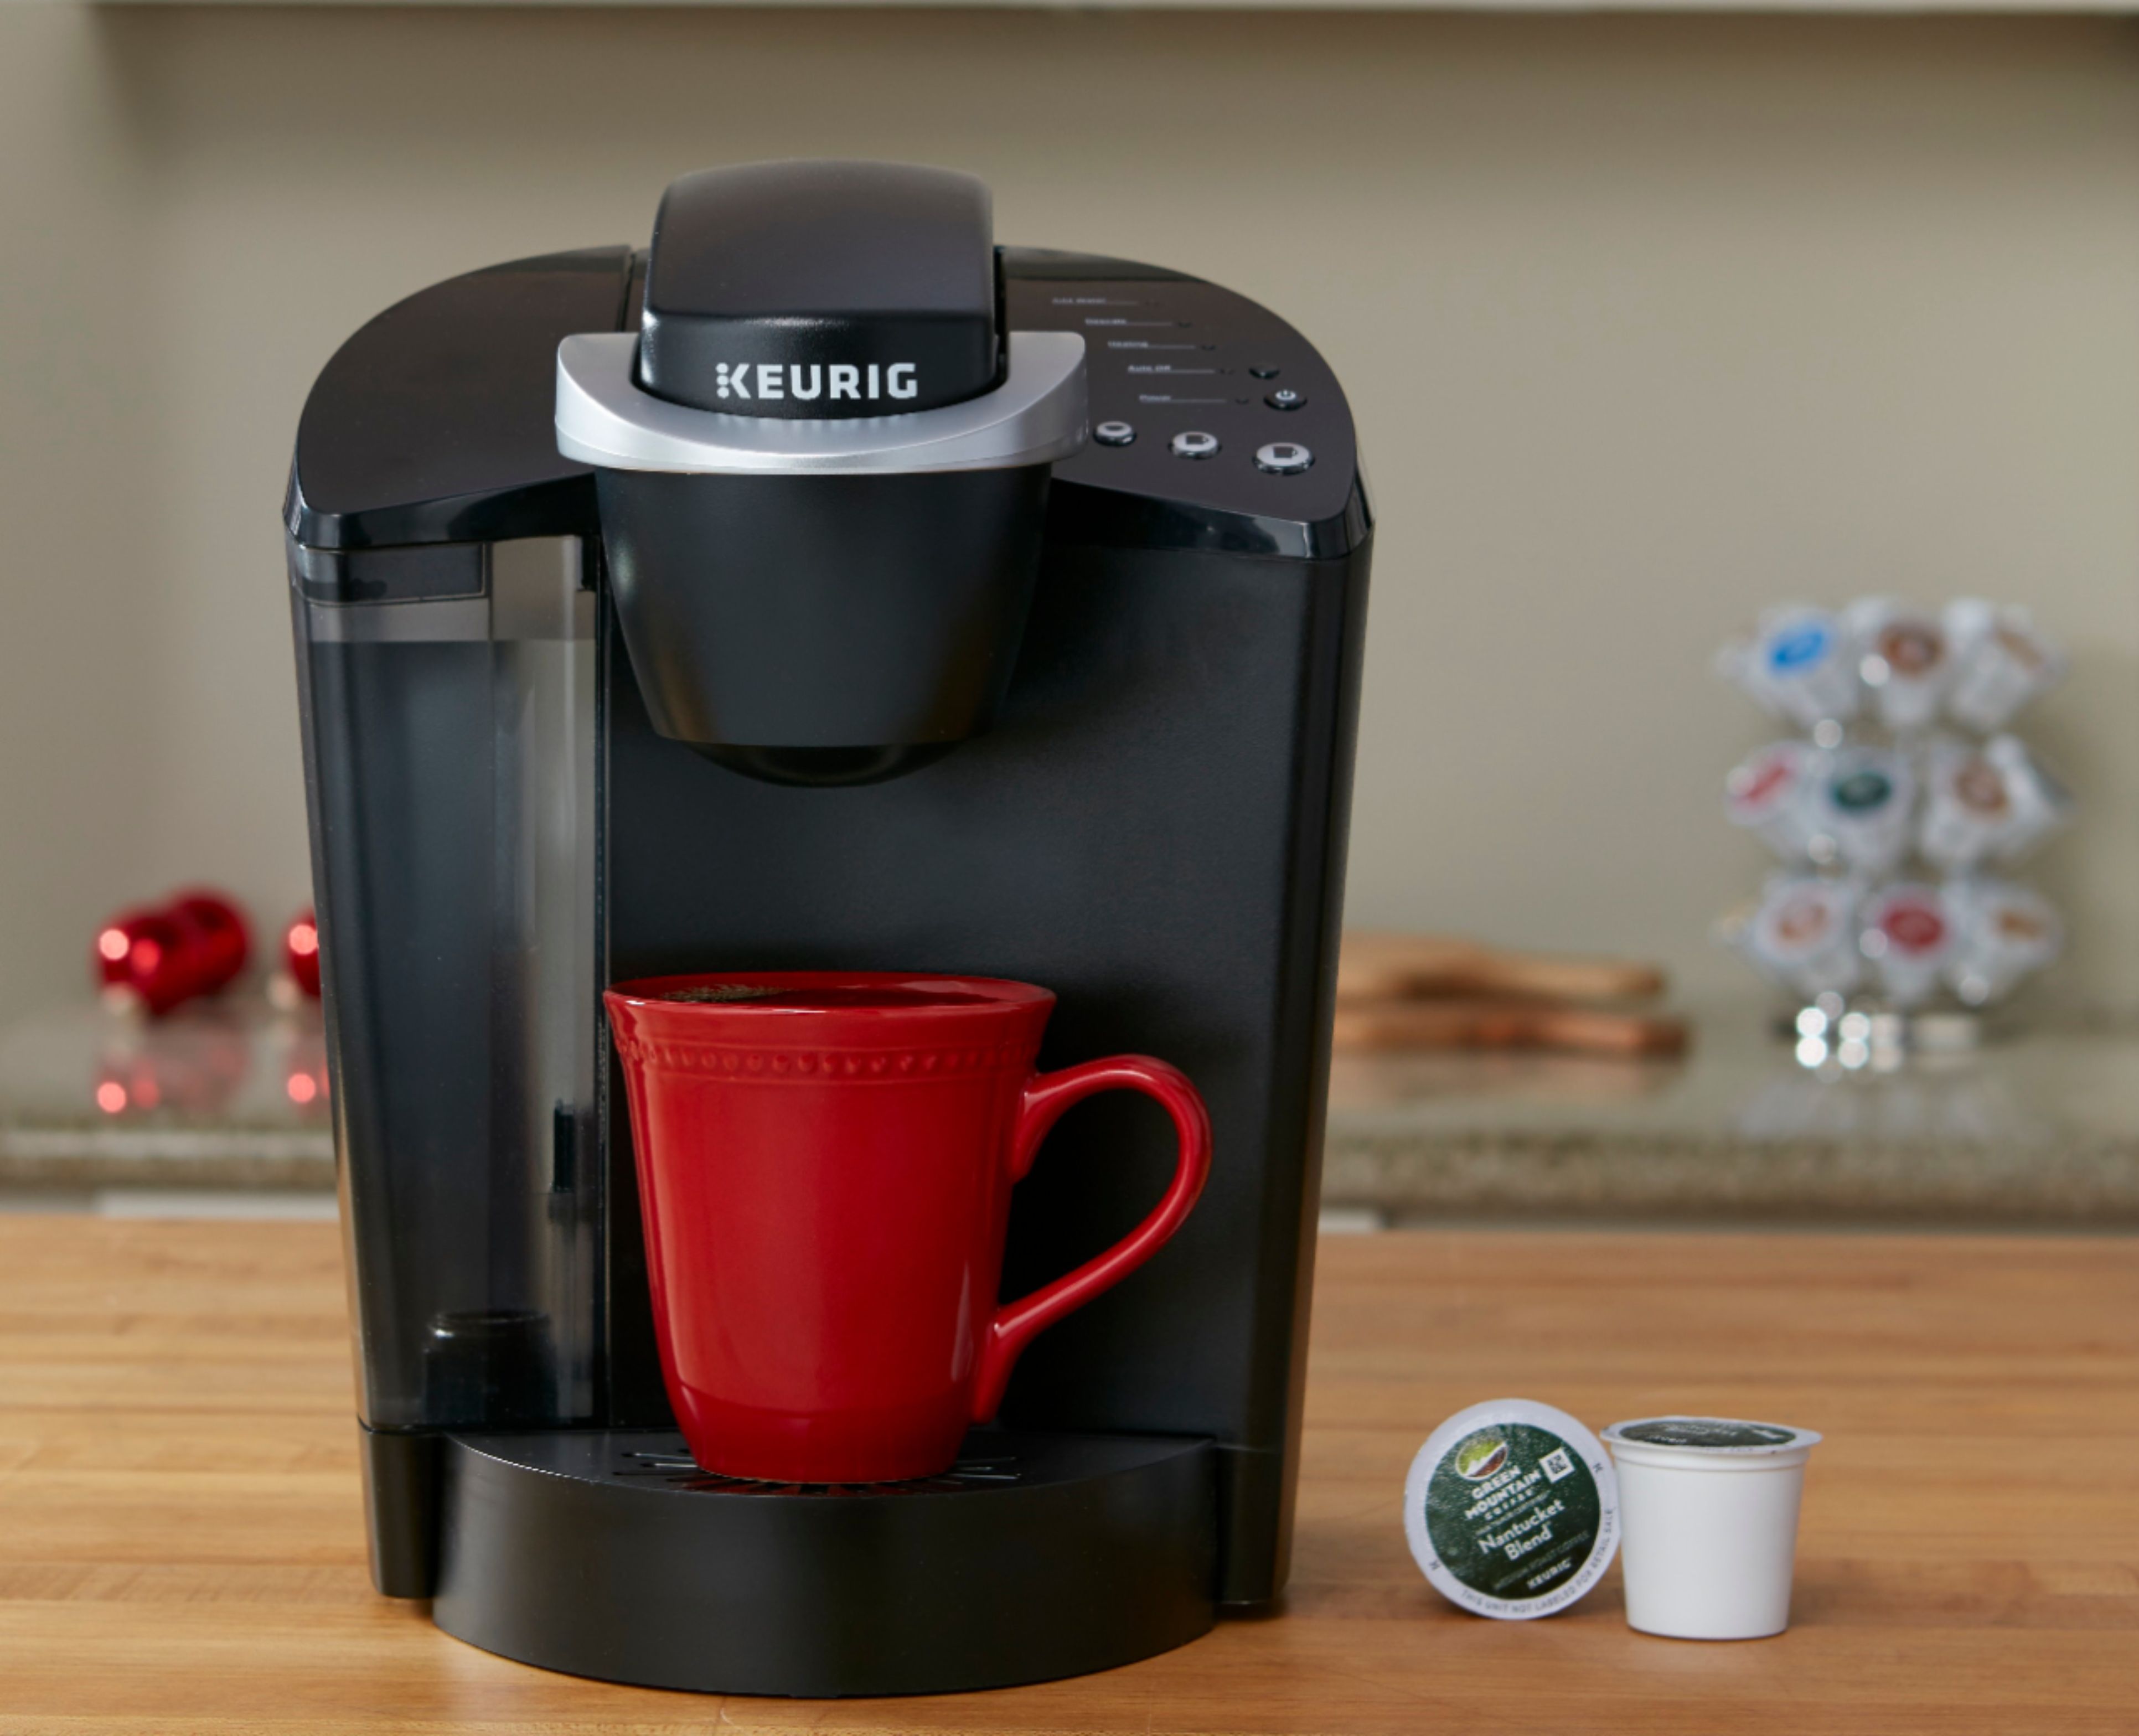 Keurig K-Cafe Special Edition Single Serve K-Cup Pod Coffee Maker with Milk  Frother Nickel 5000200558 - Best Buy